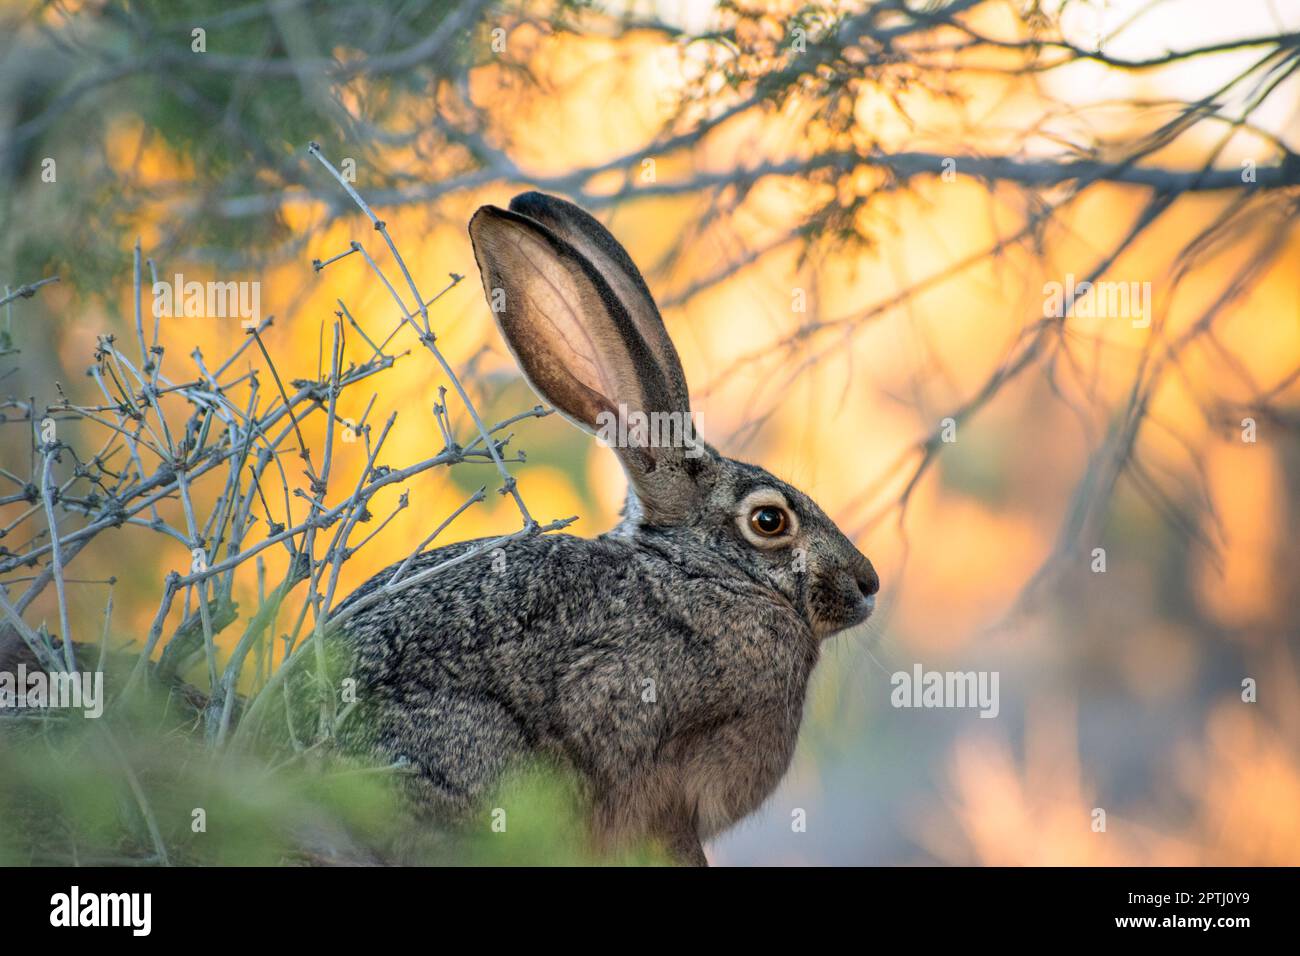 The black-tailed jackrabbit (Lepus californicus), or American desert hare, is the most widely distributed jackrabbit in North America. Stock Photo